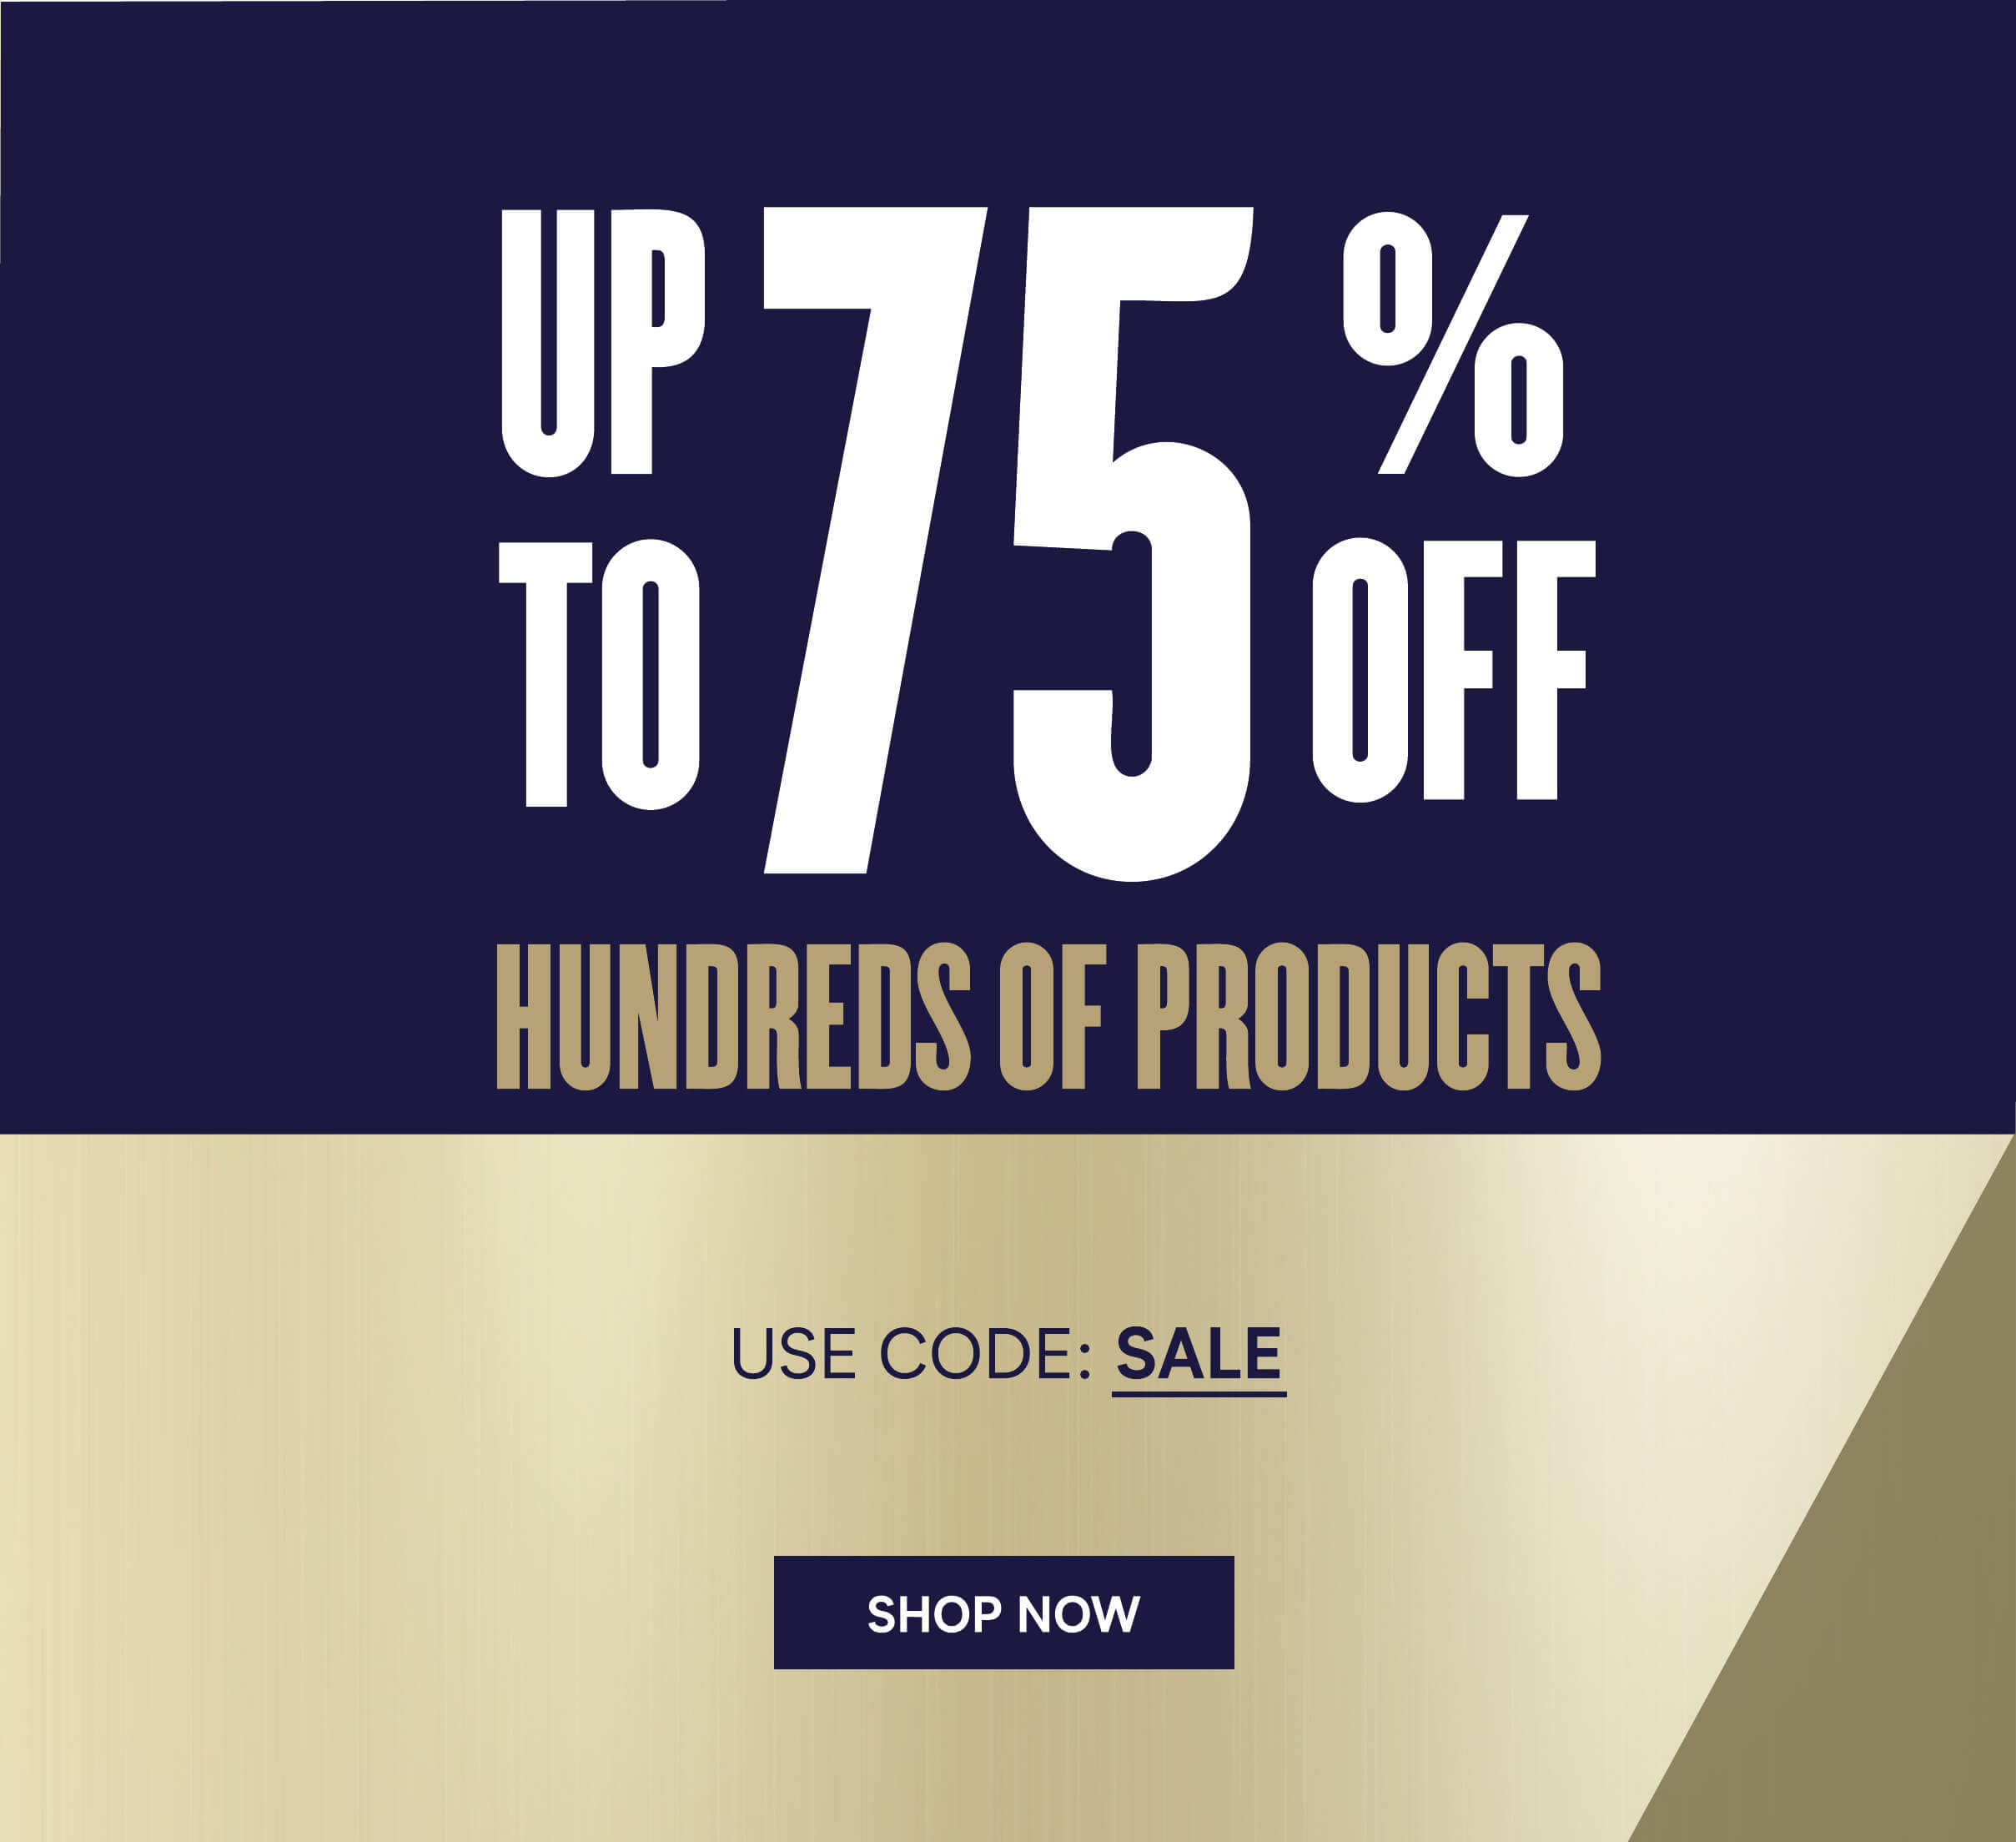 Up to 75% off hundreds of products  Y llFF o i EDS OF PRODUCTS 